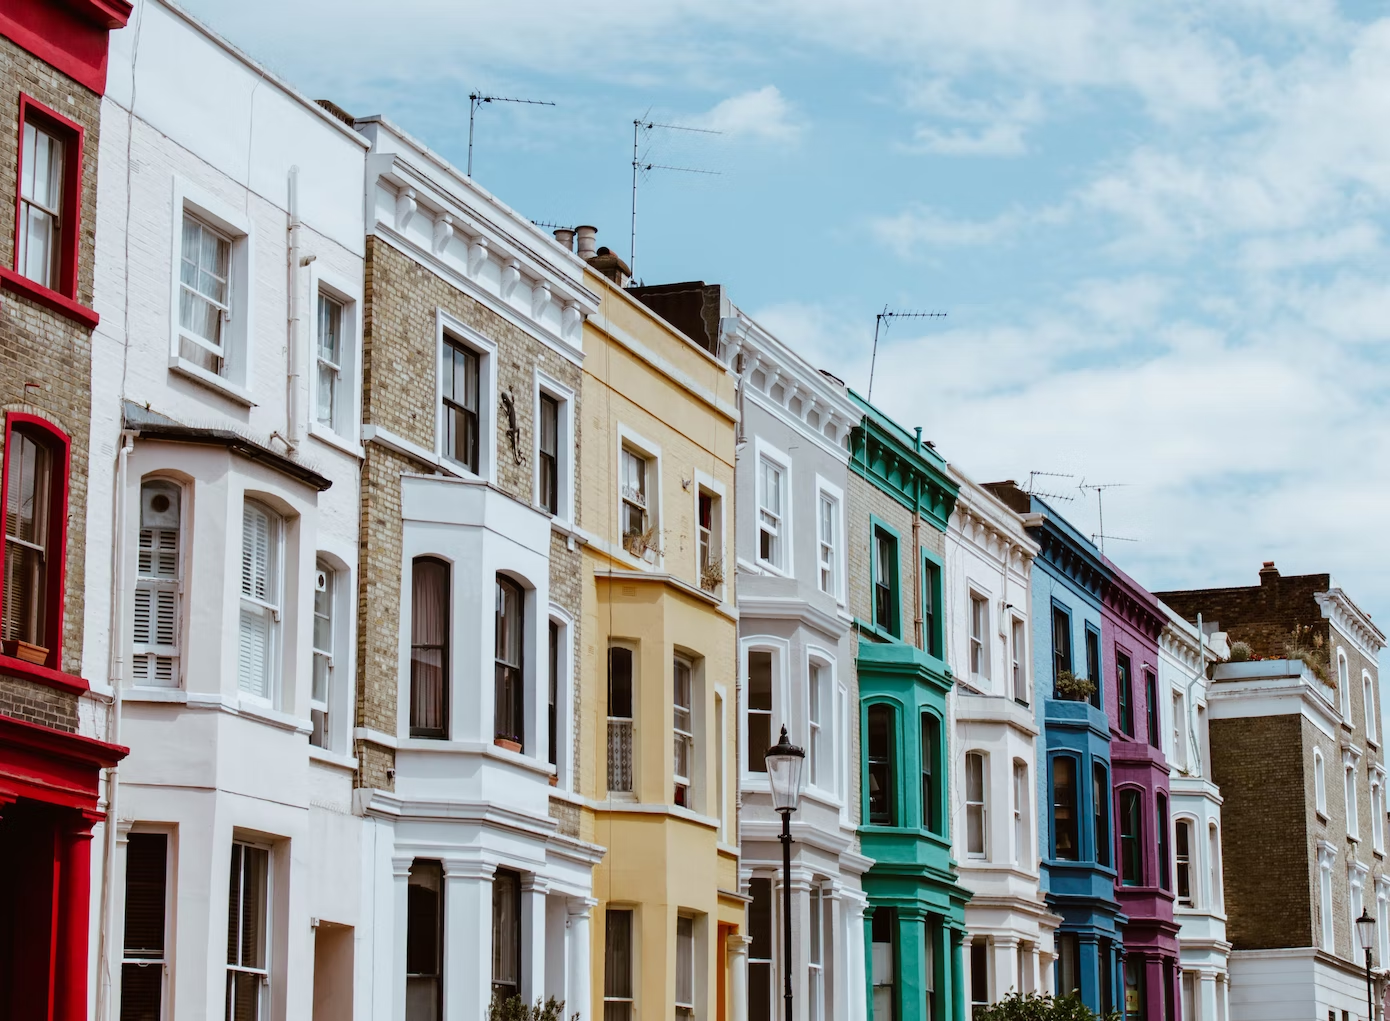 A row of colourful terraced houses for sale or rent.